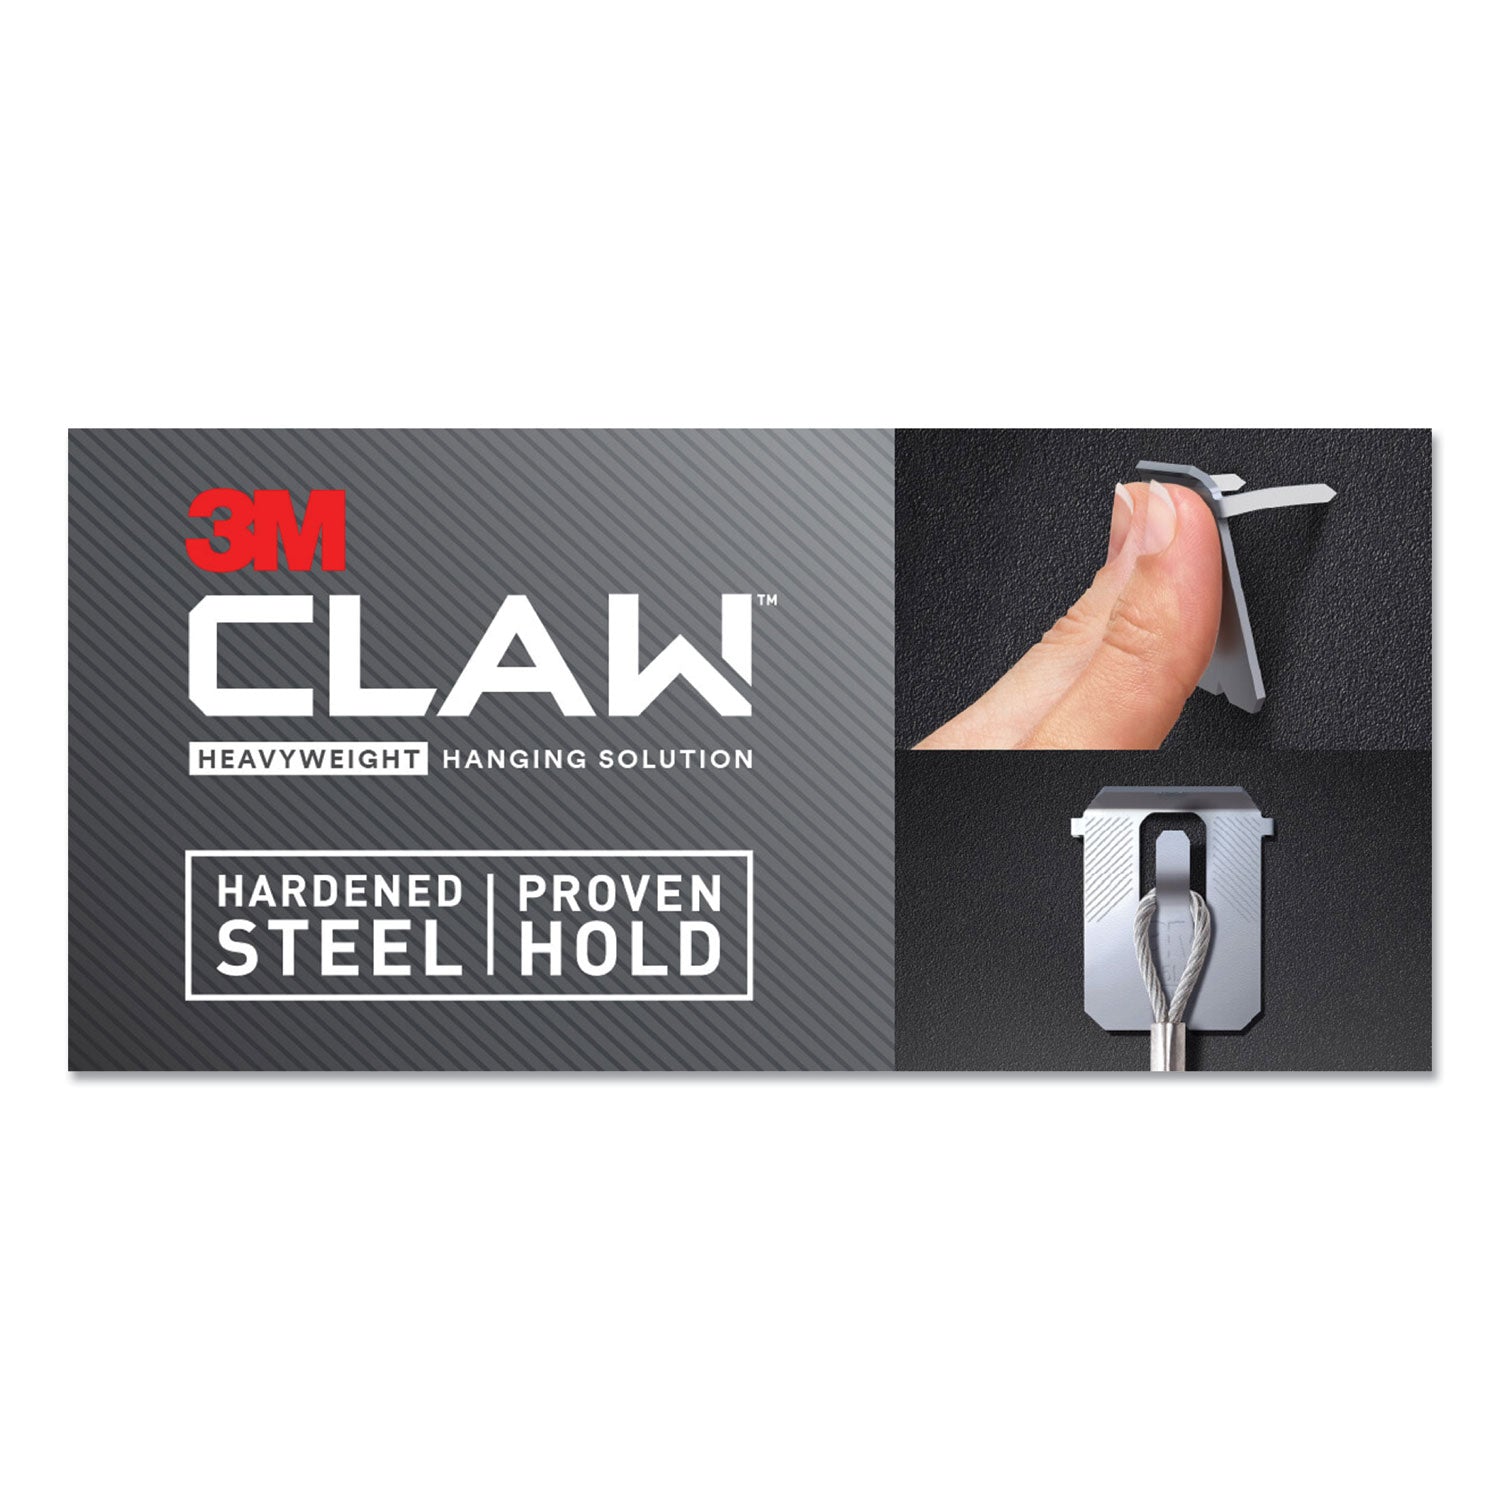 claw-drywall-picture-hanger-stainless-steel-25-lb-capacity-4-hooks-and-4-spot-markers_mmm3ph25m4es - 8